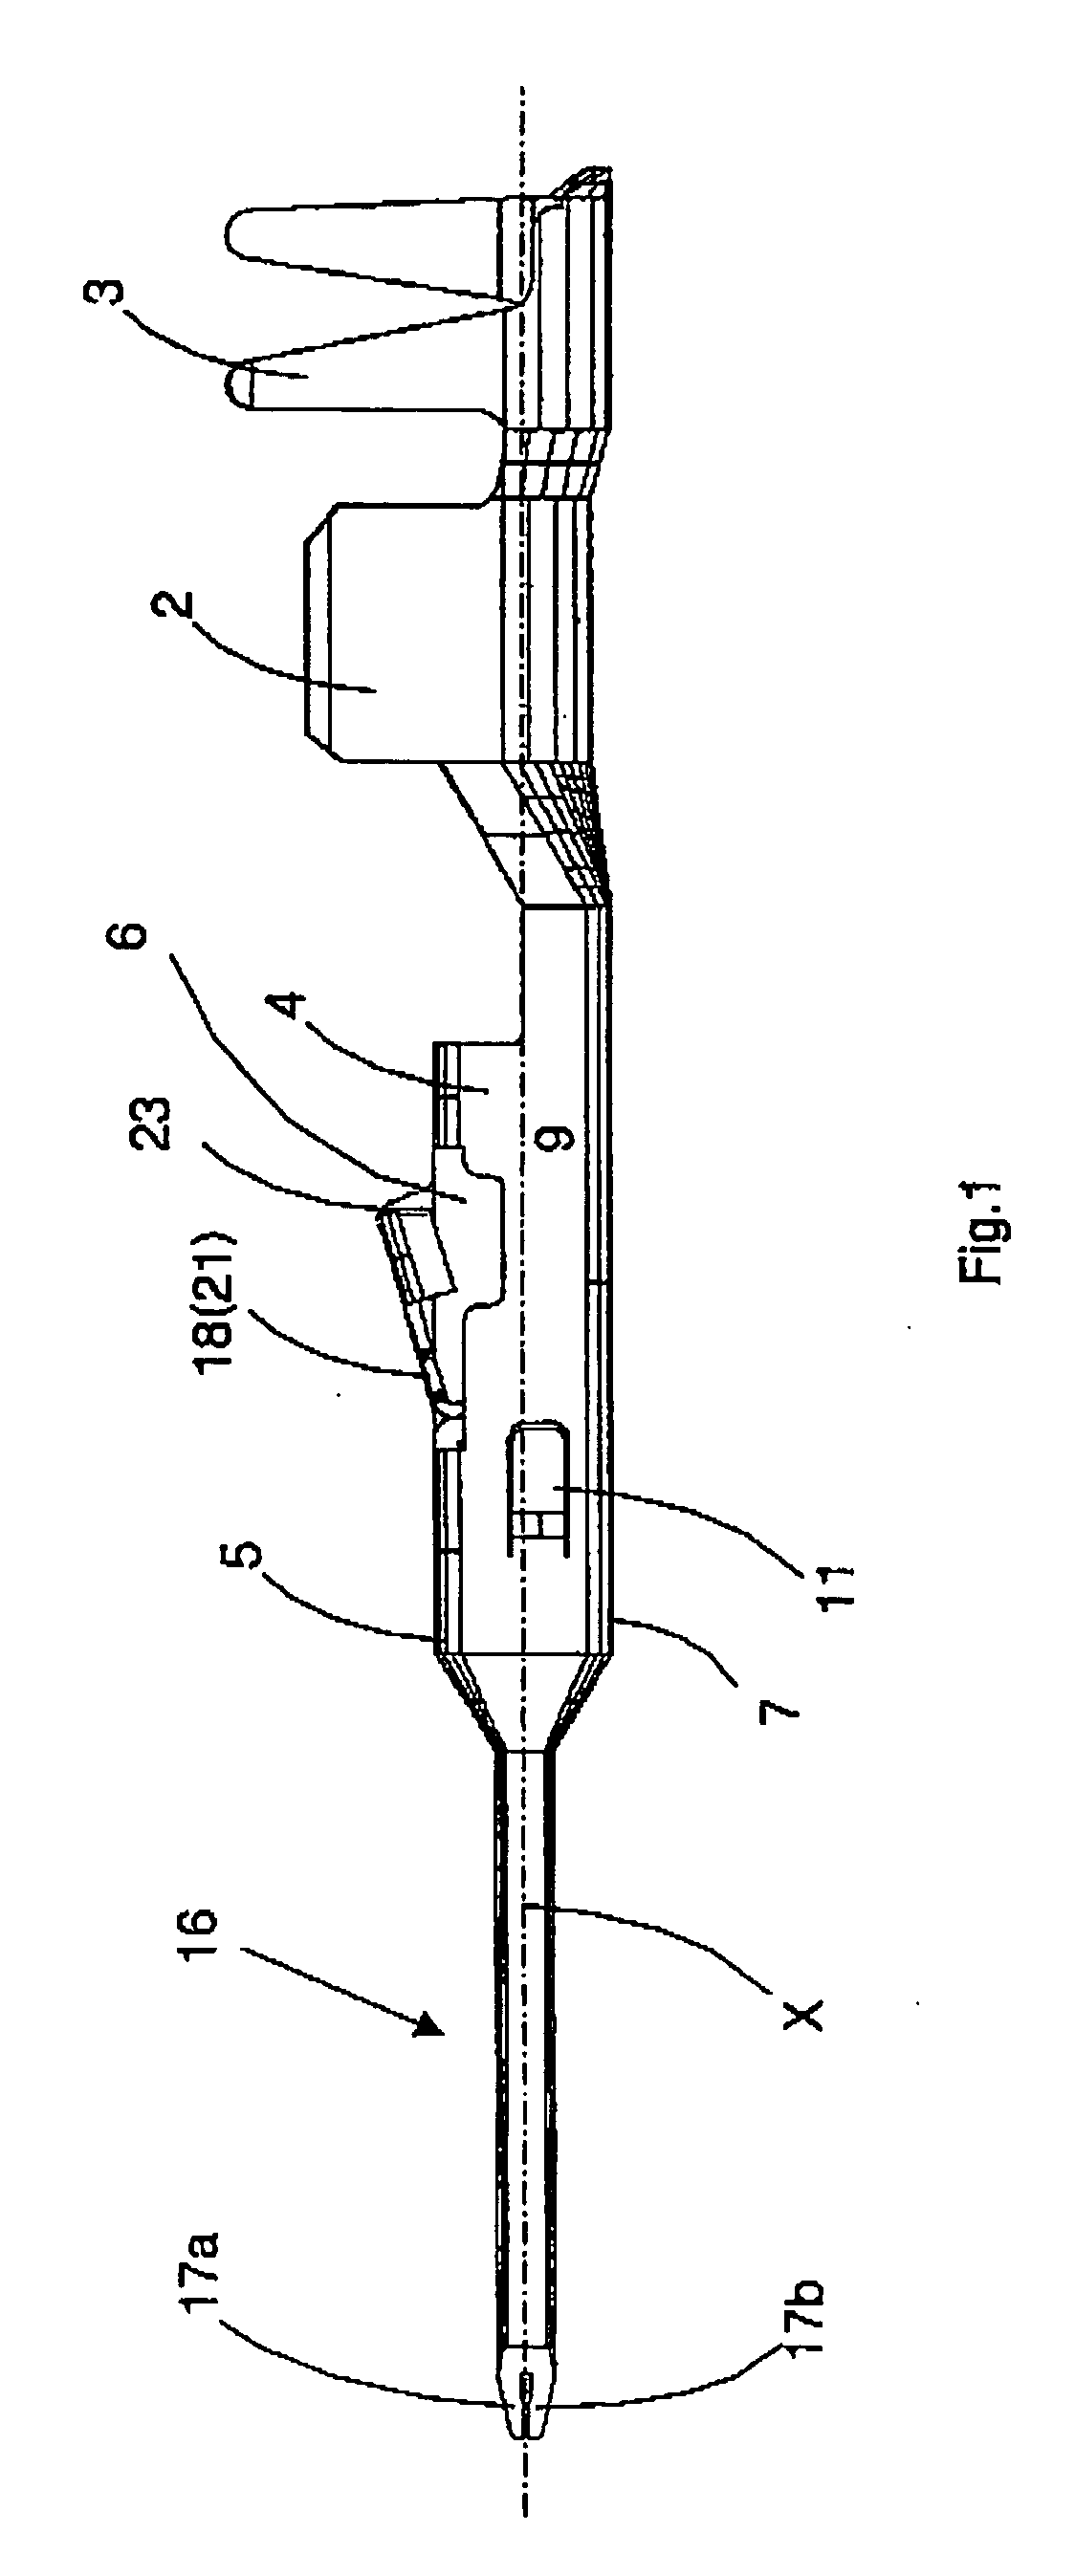 Electrical contact element